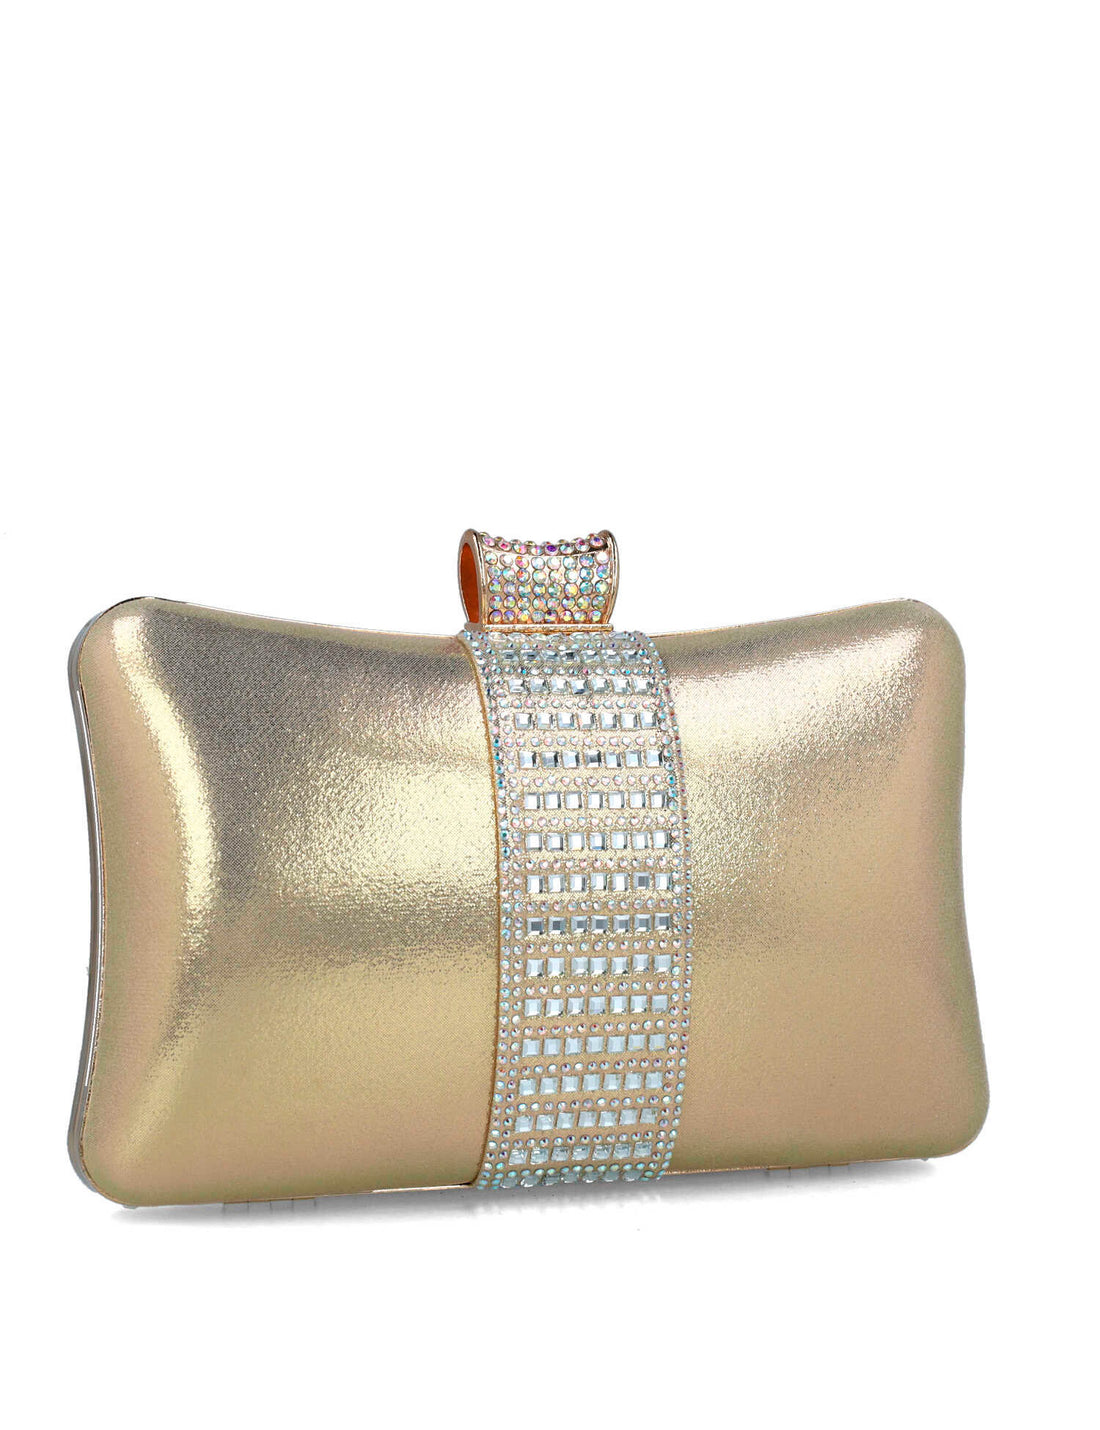 Gold Clutch With Embellishment_85498_00_02